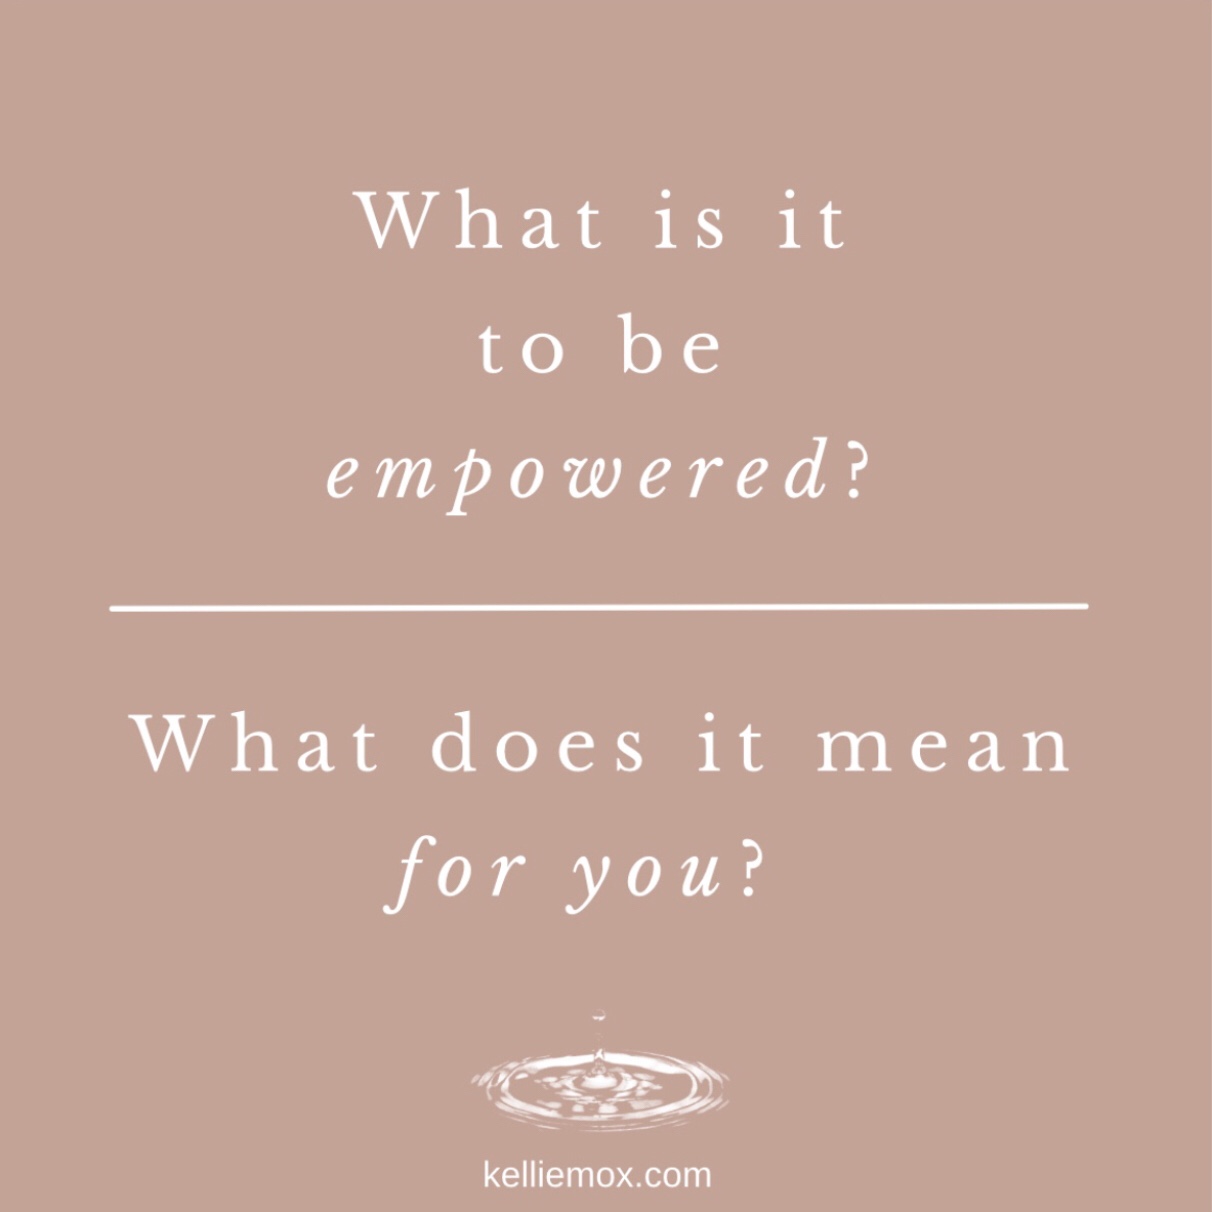 A text saying What is it to be empowered?